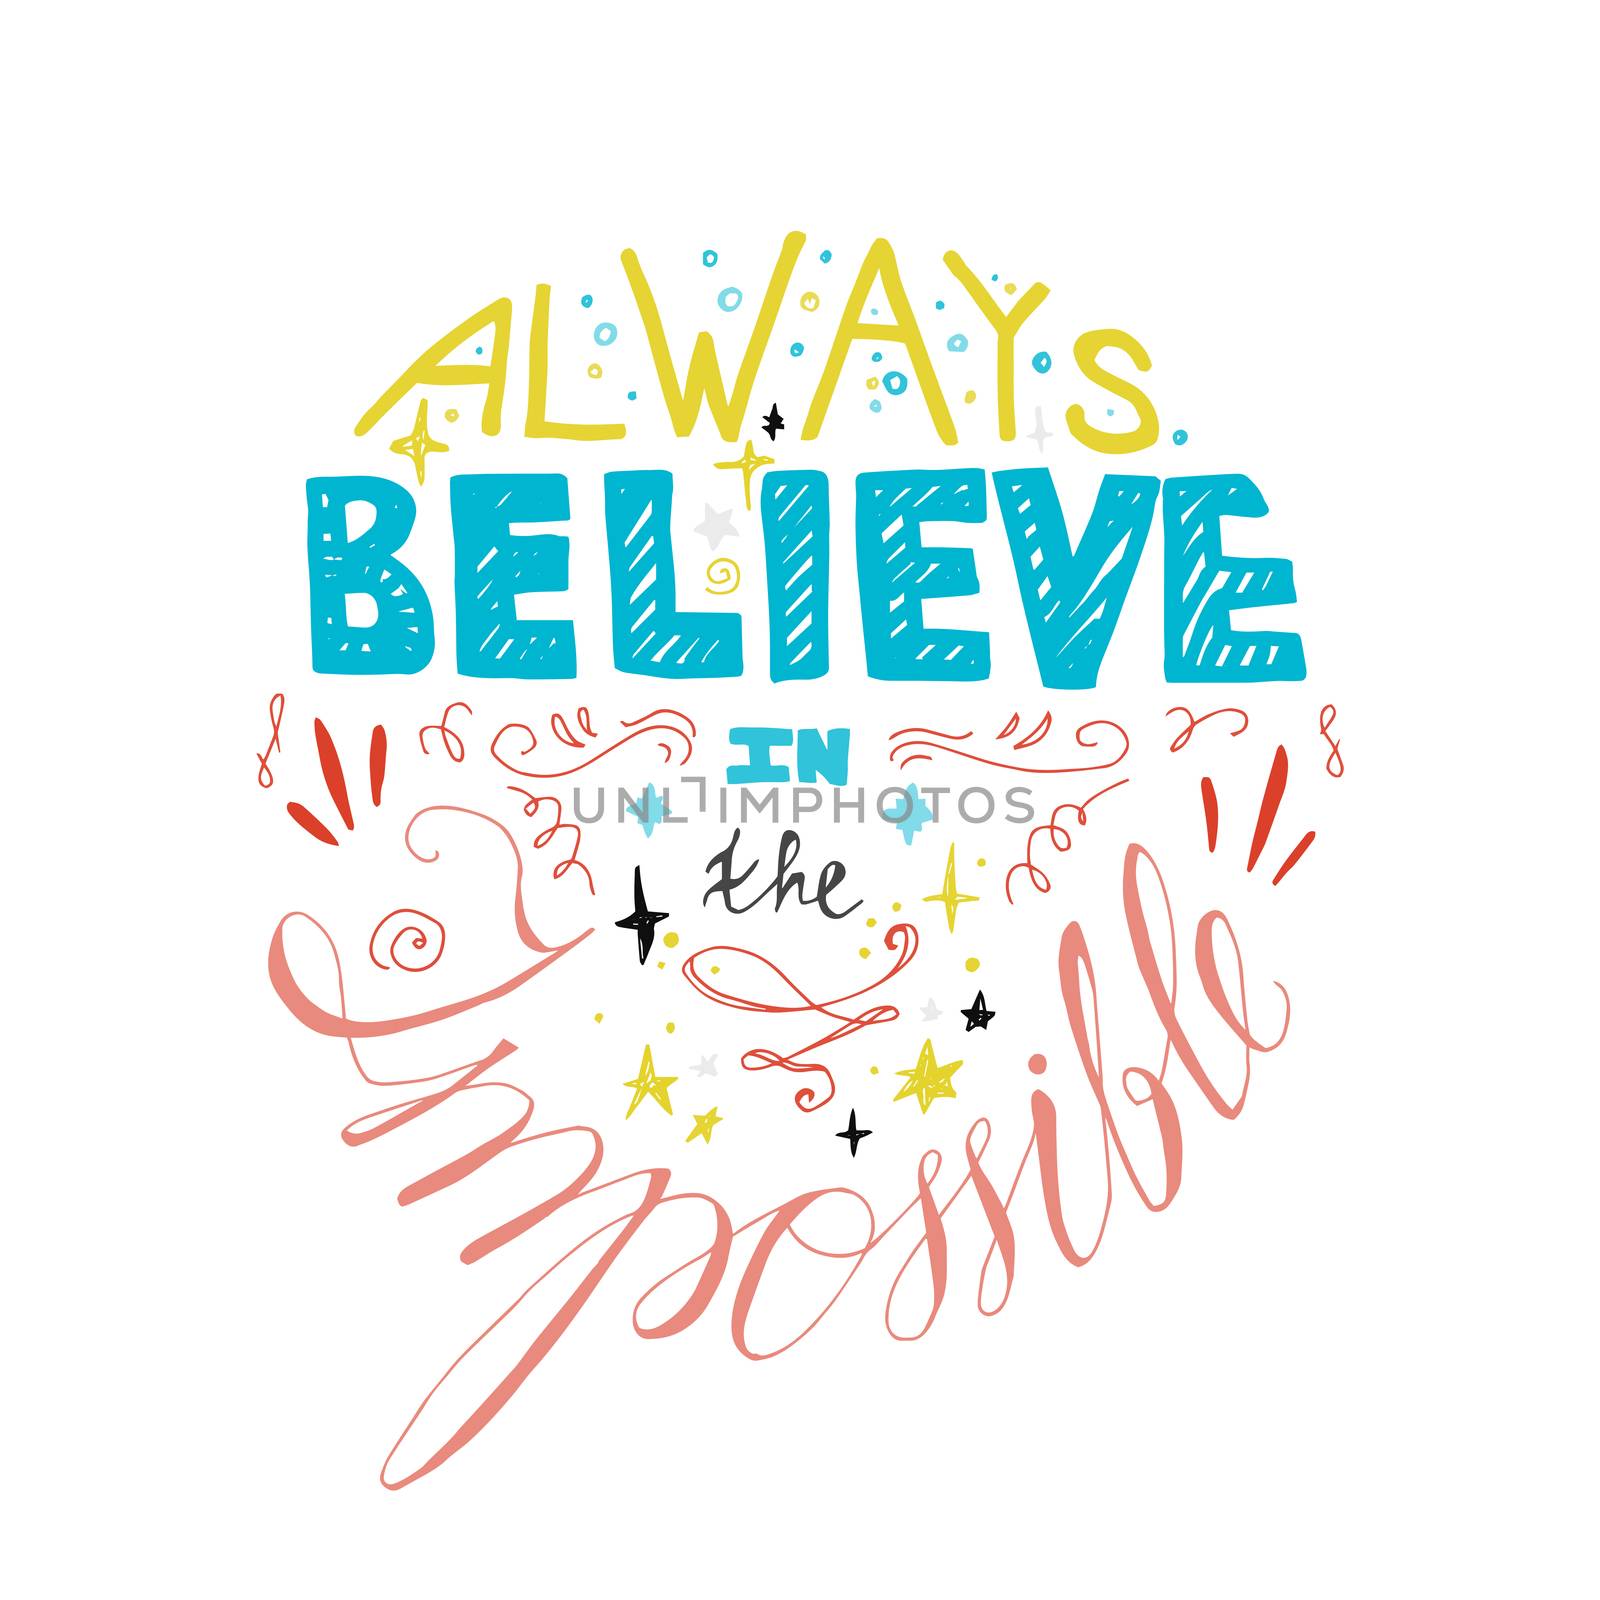 Lettering motivation poster. Quote about dream and believe for fabric, print, decor, greeting card. Always believe in the impossible. Vector